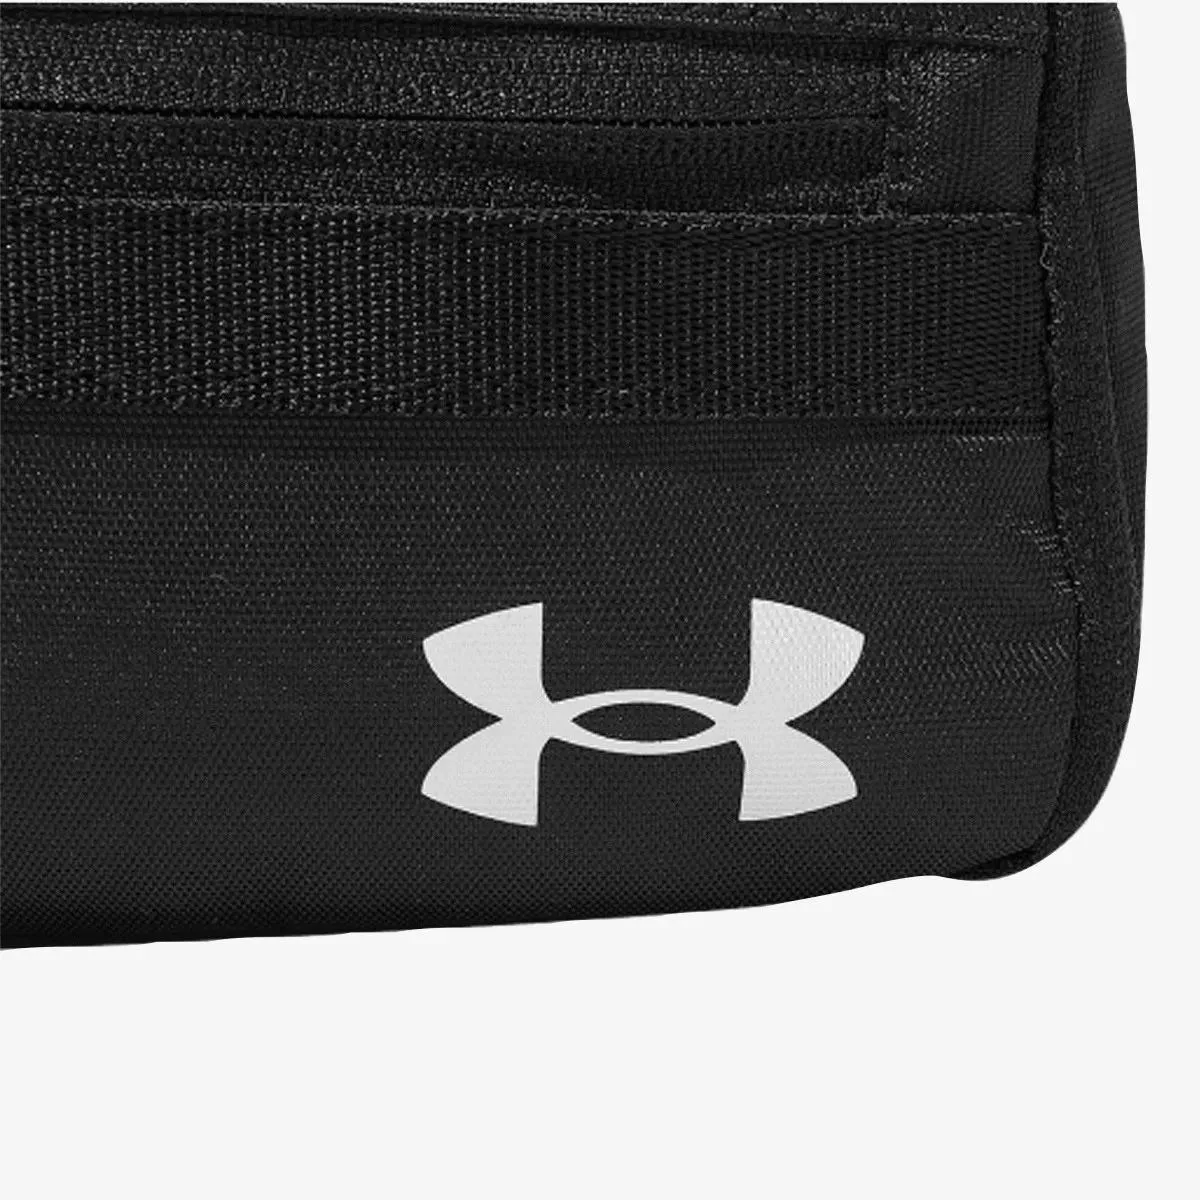 Under Armour Contain Travel Kit 